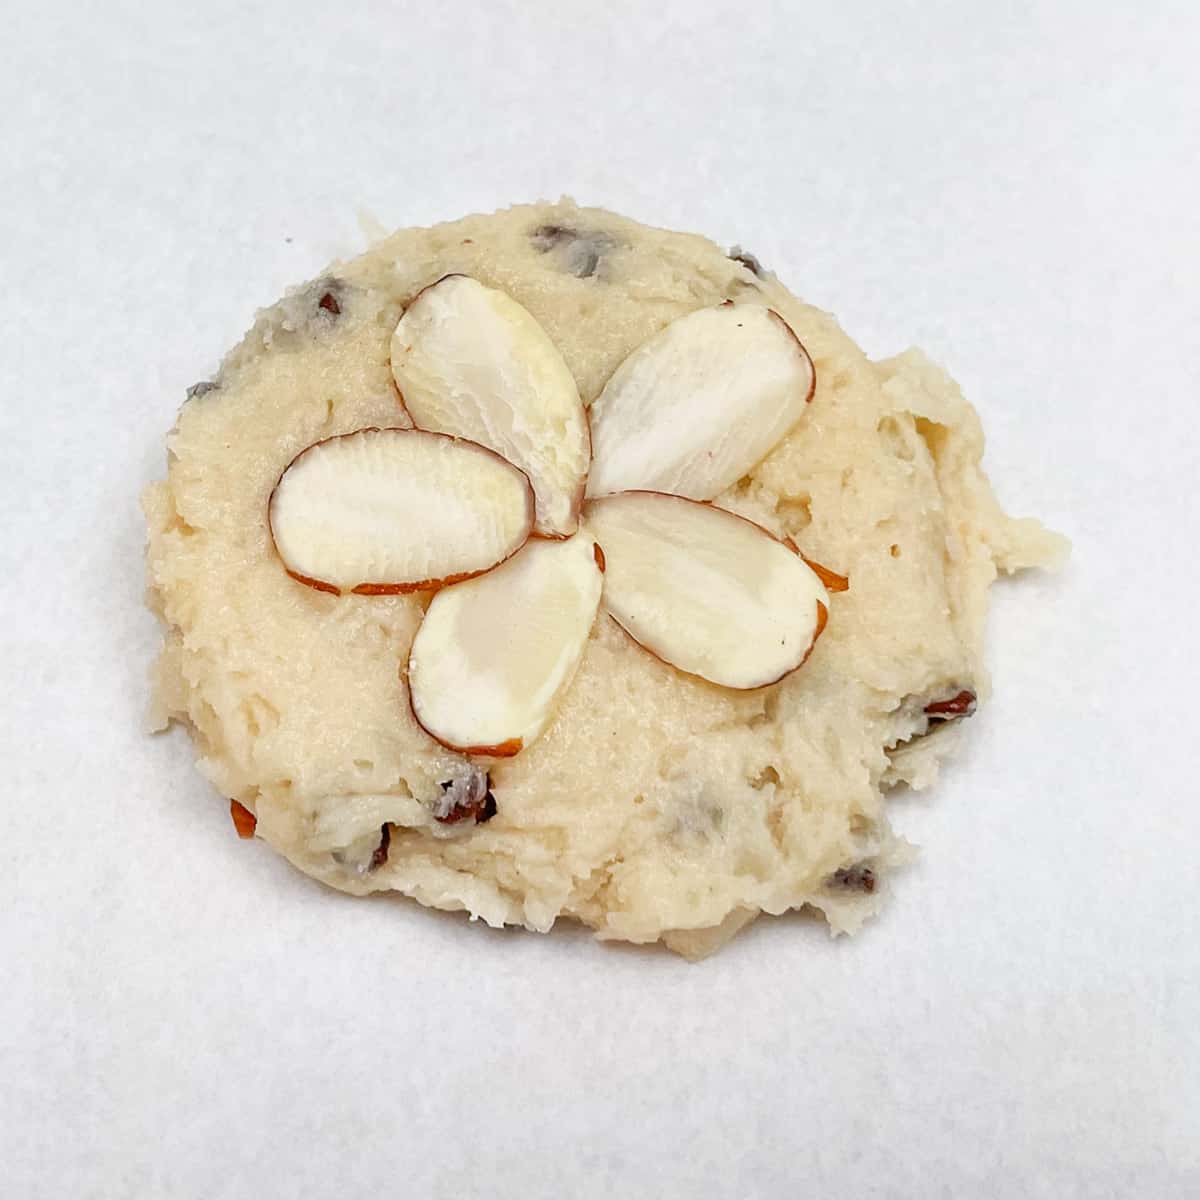 Five sliced almonds pieces place around in a flower pattern before baking the cookies.